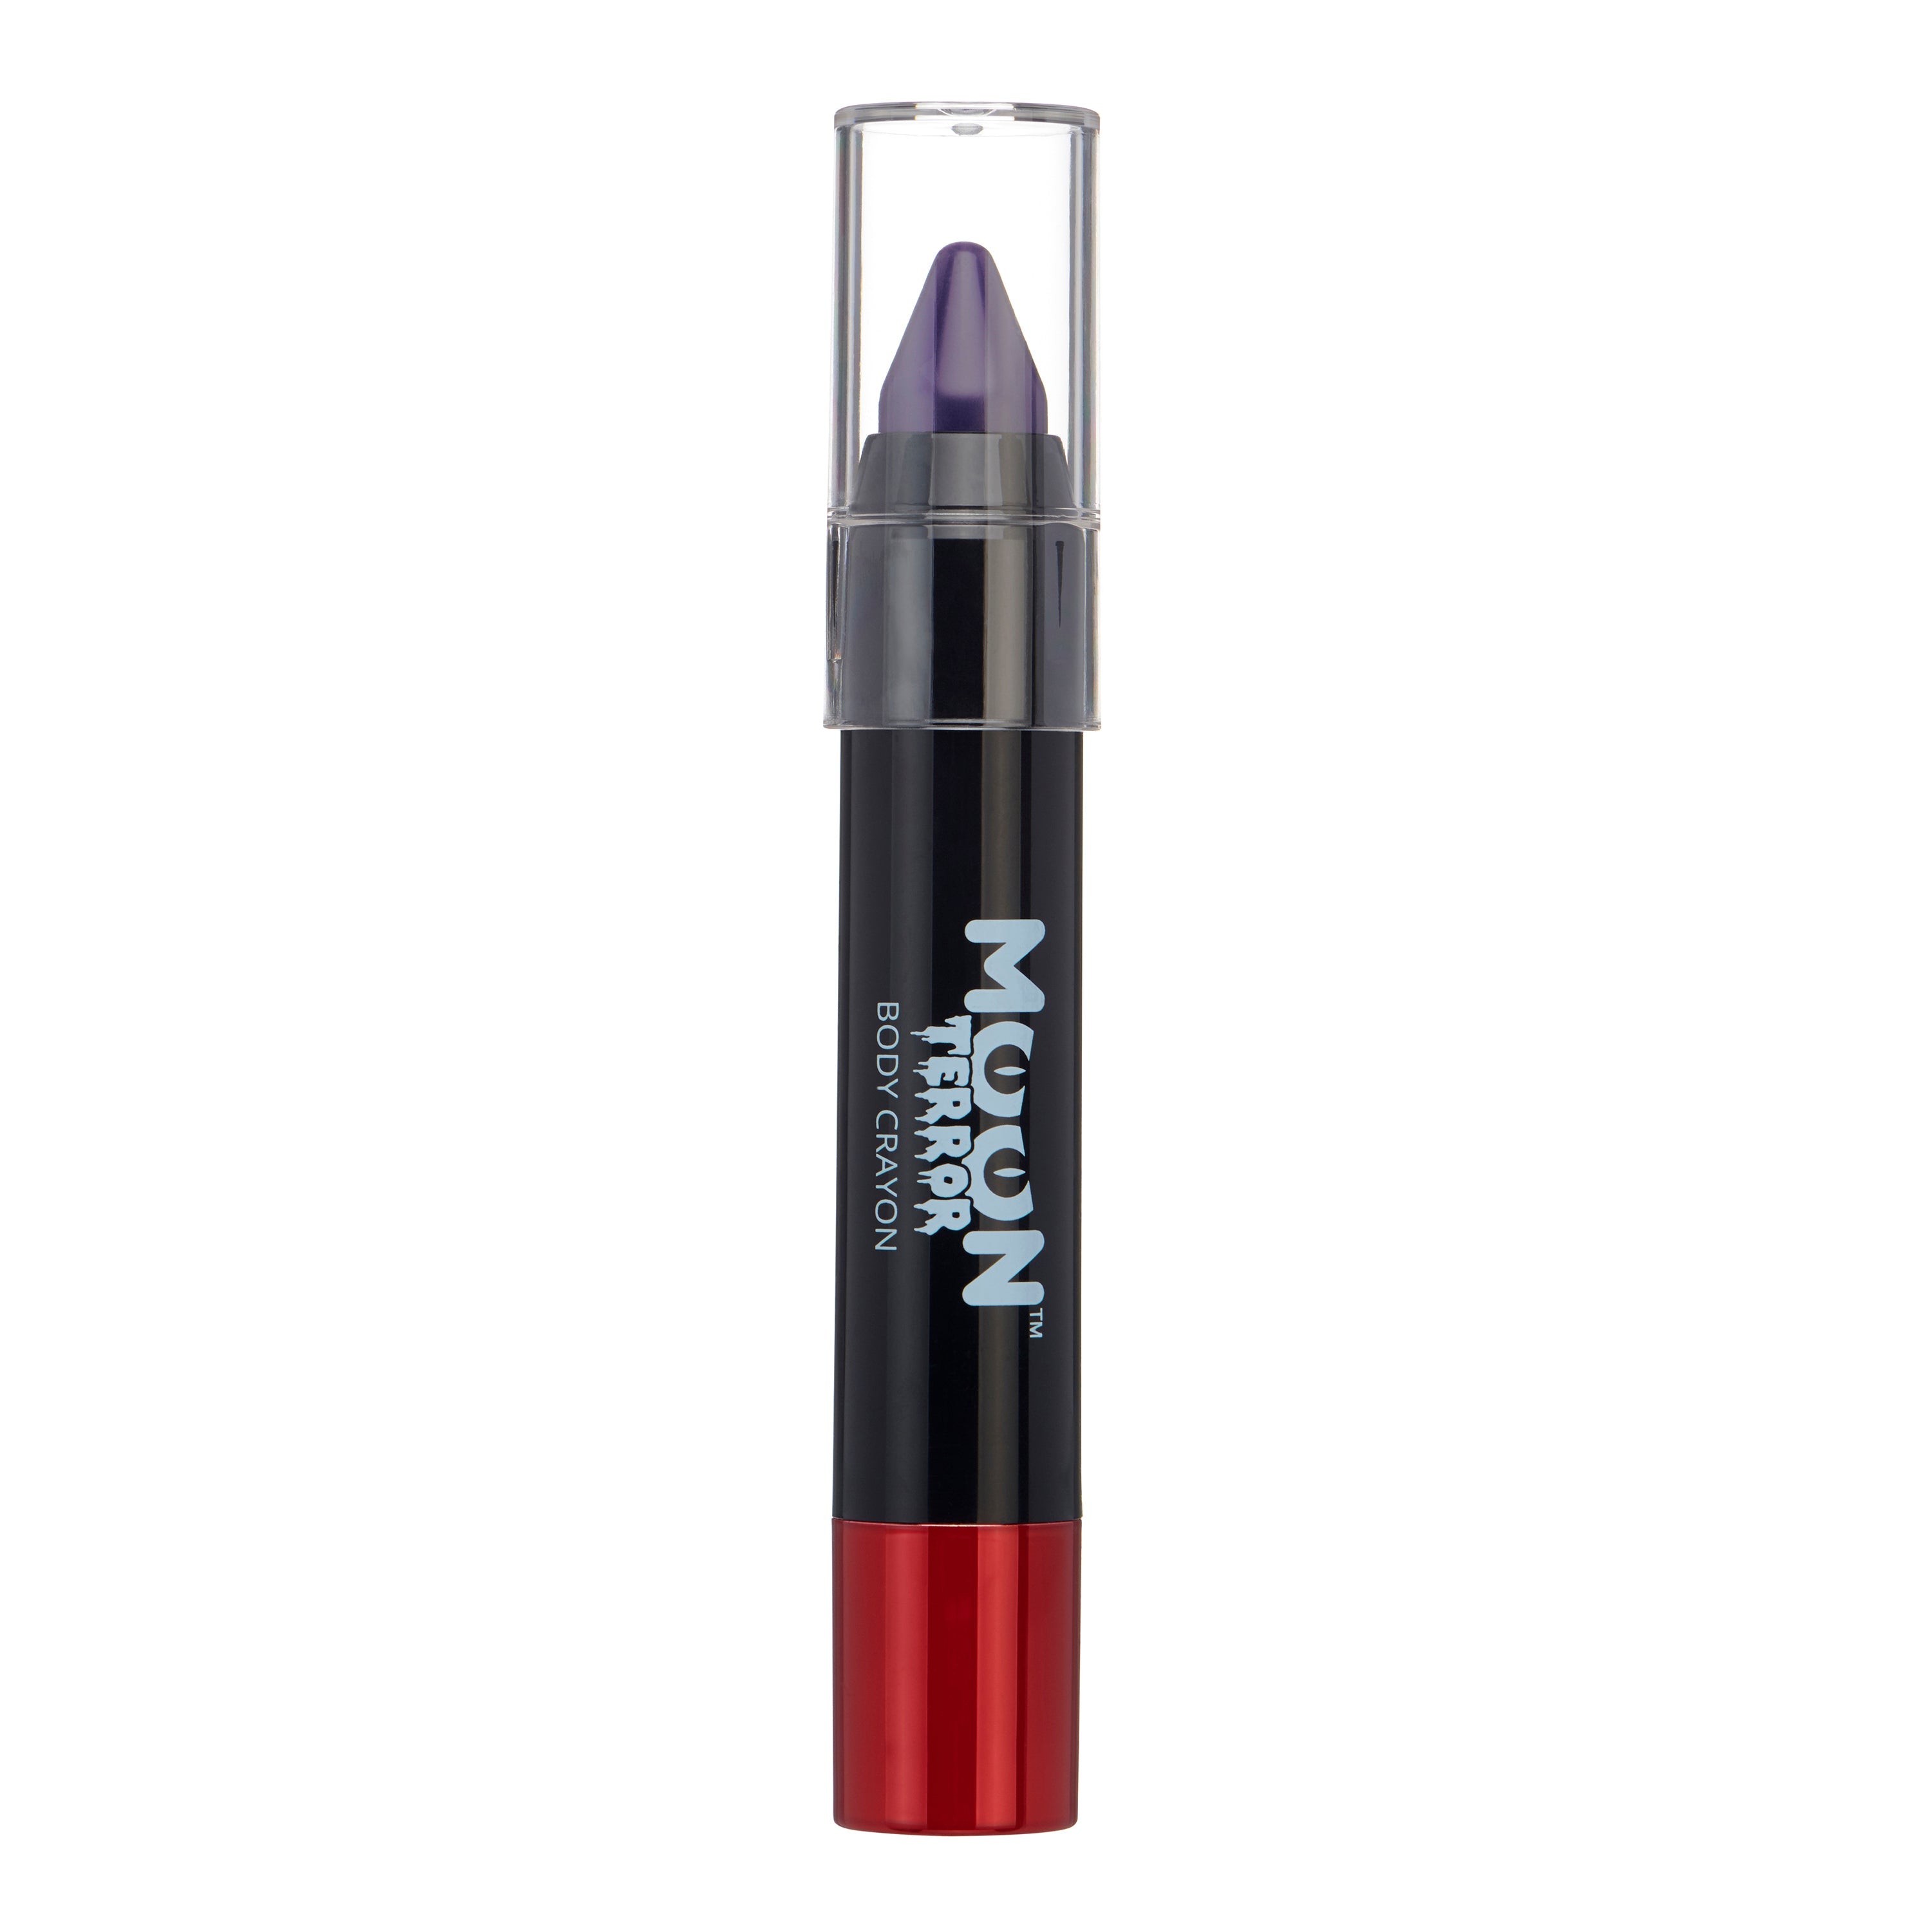 Poison Purple - Terror Face & Body Crayon, 3.5g. Cosmetically certified, FDA & Health Canada compliant and cruelty free.